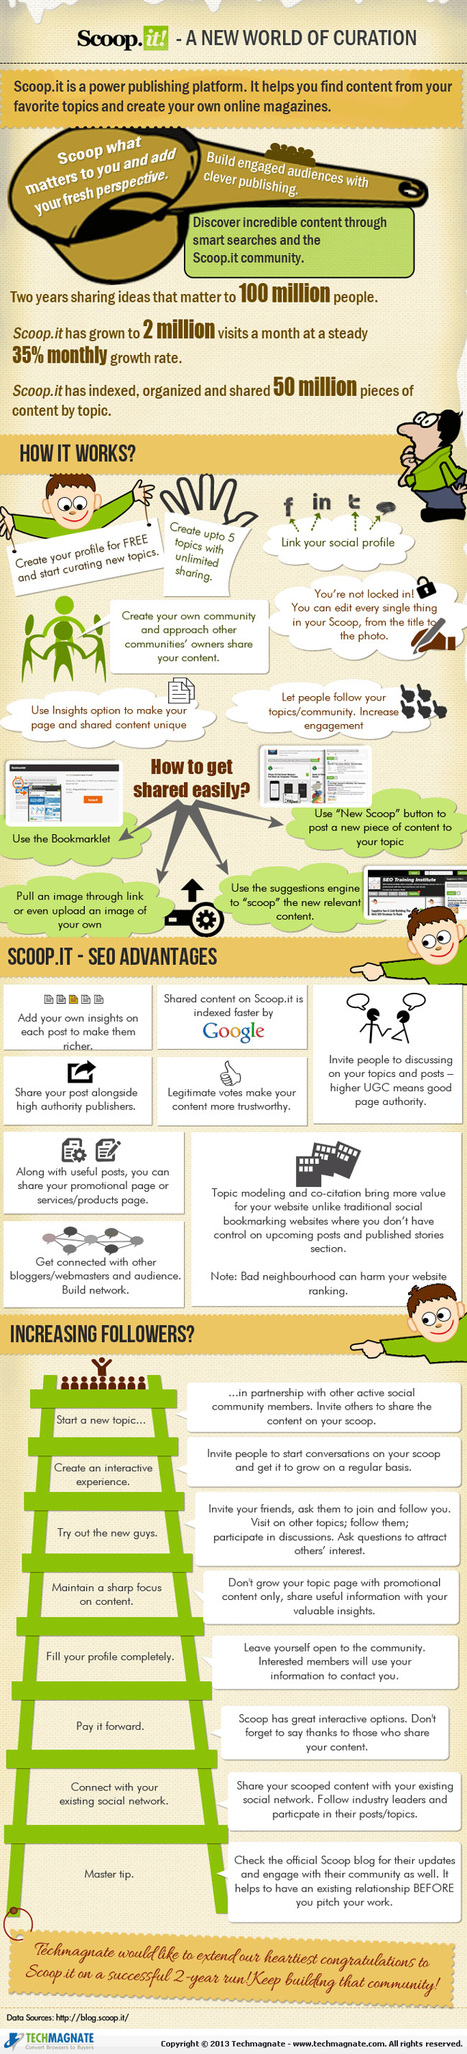 Scoop.It for SEO – A New World of Curation [Infographic] | 21st Century Learning and Teaching | Scoop.it